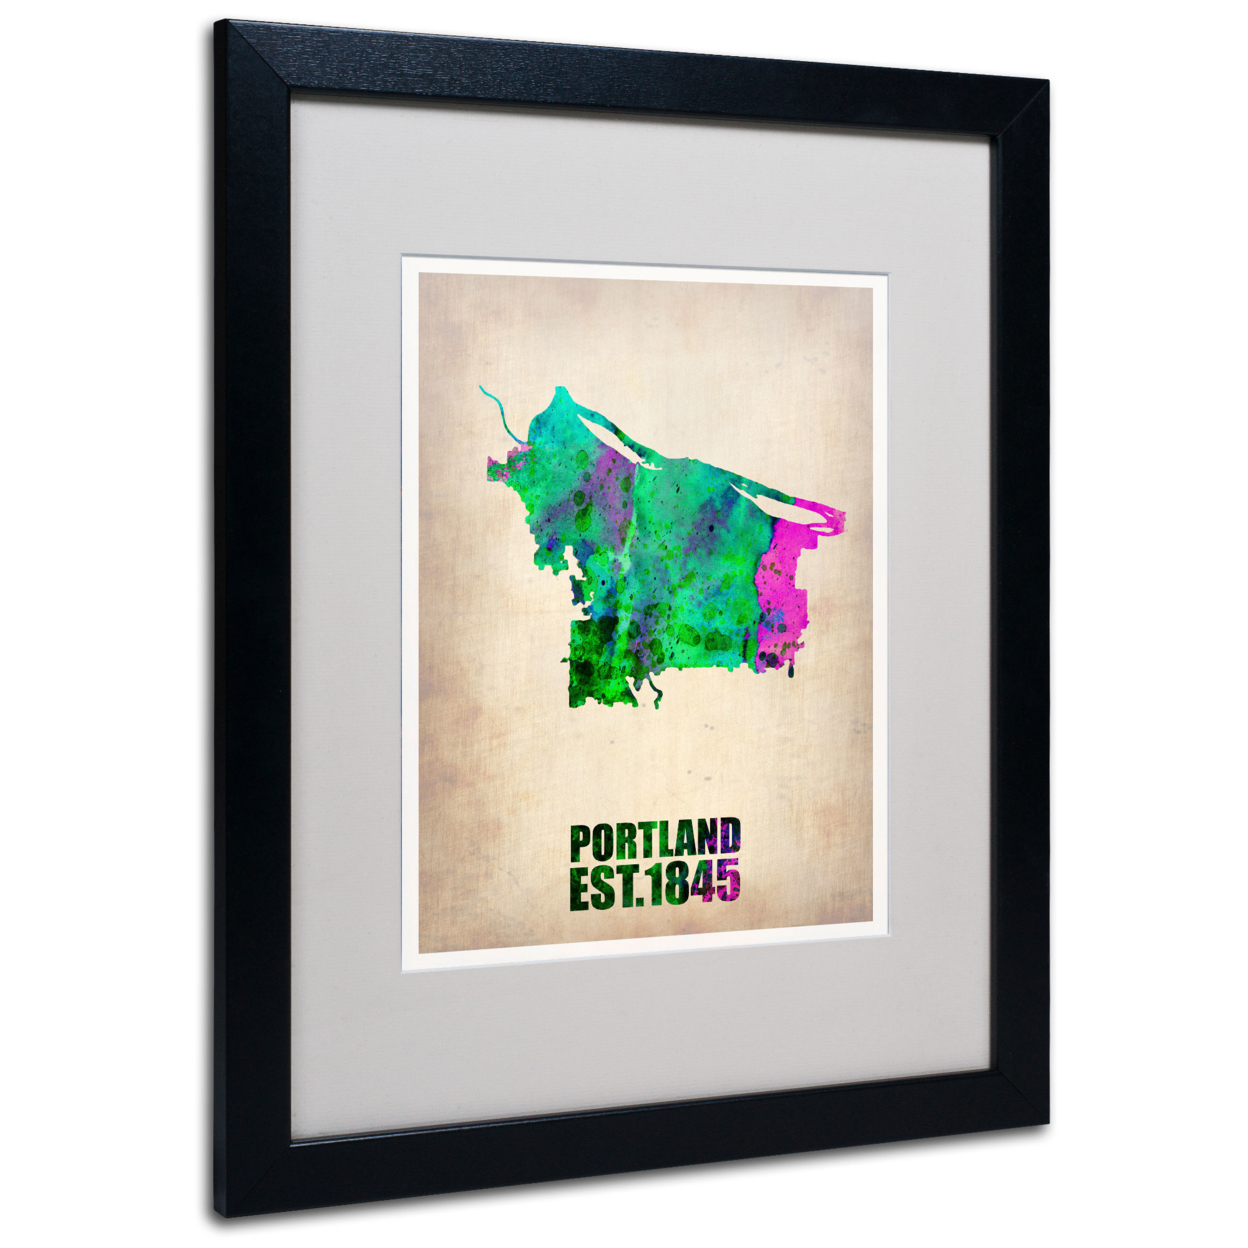 Naxart 'Portland Watercolor Map' Black Wooden Framed Art 18 X 22 Inches